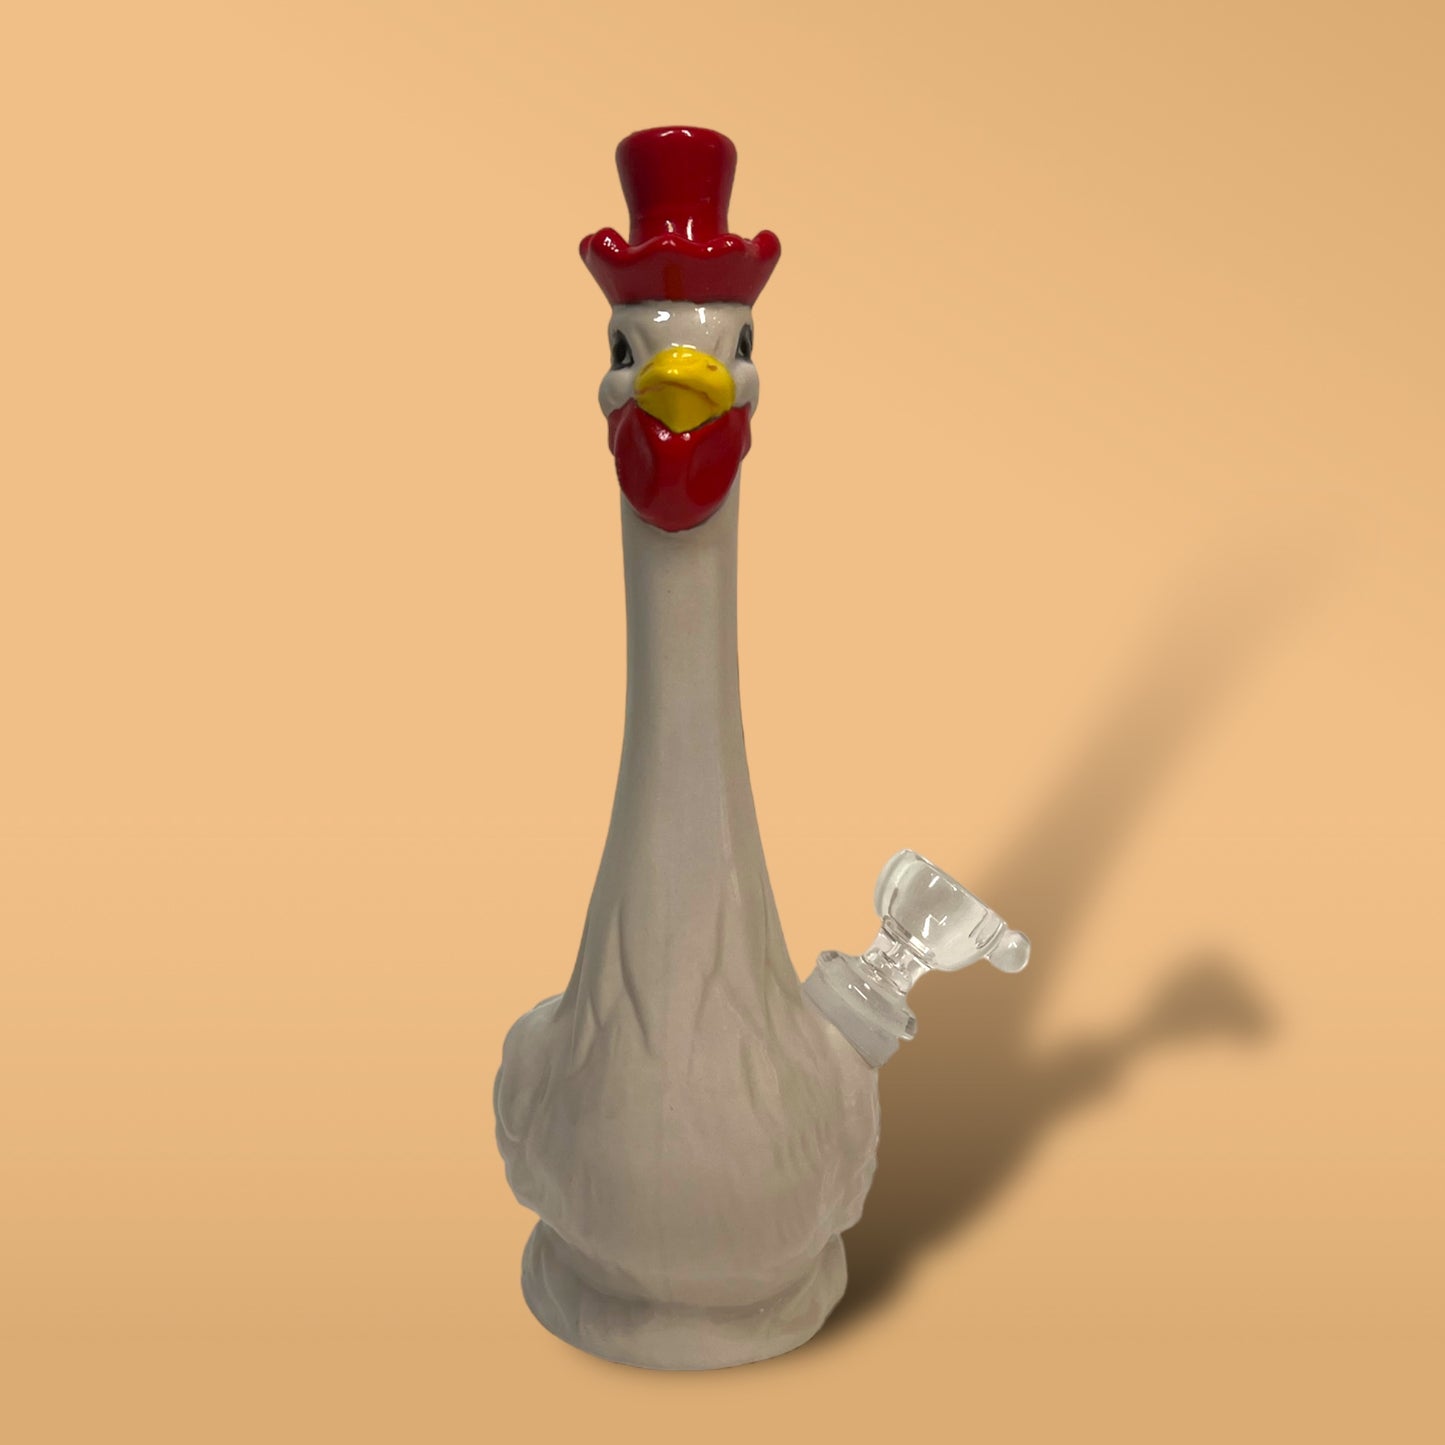 Kitschy Rooster